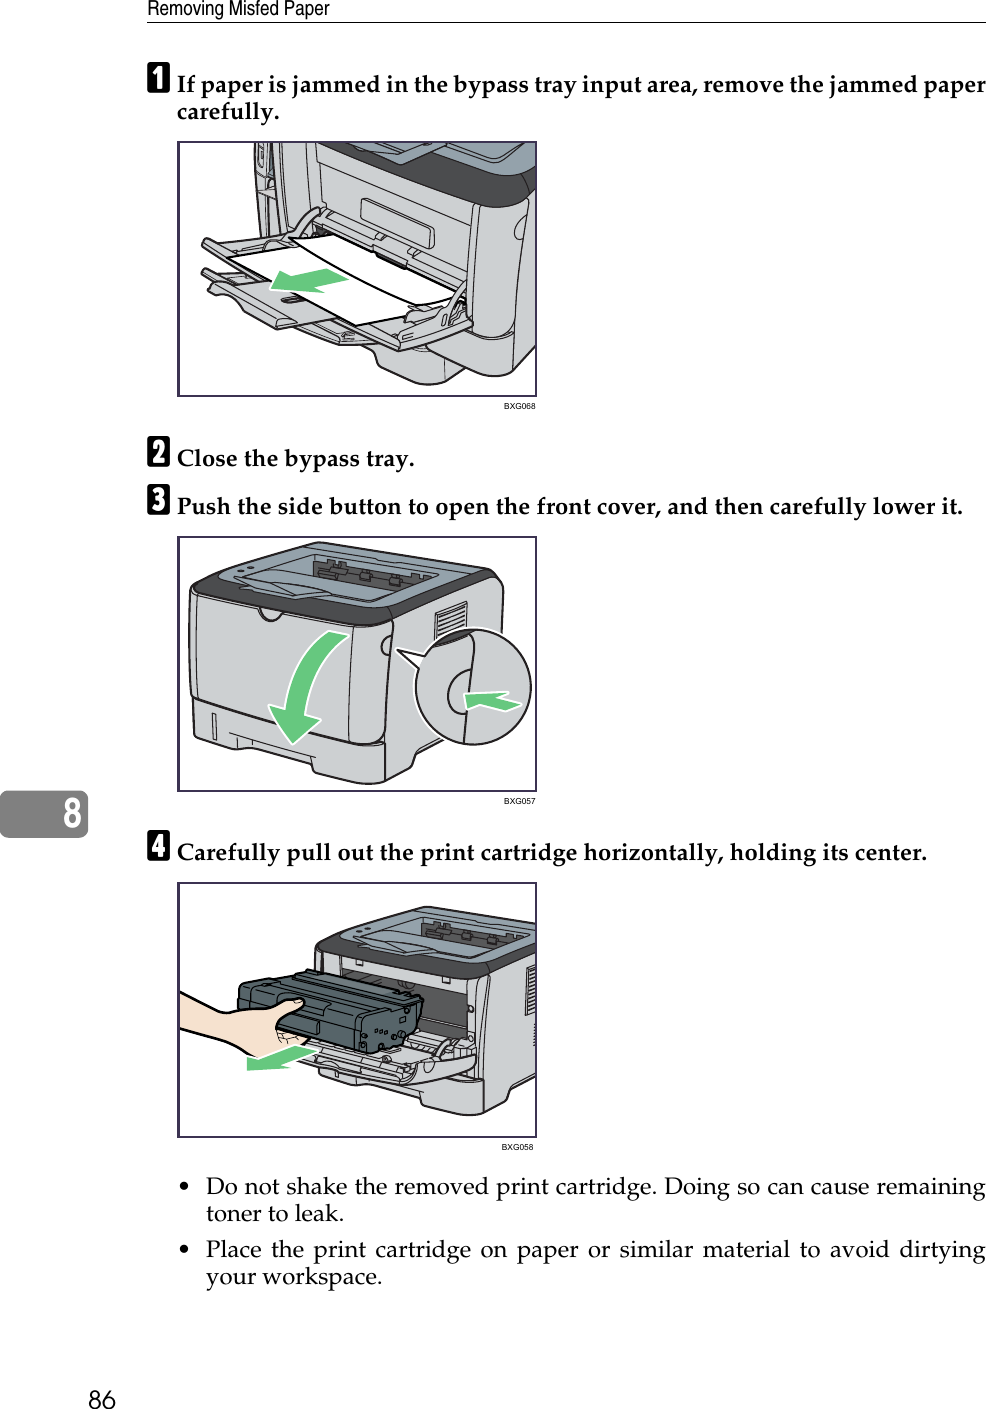 Removing Misfed Paper868AIf paper is jammed in the bypass tray input area, remove the jammed papercarefully.BClose the bypass tray.CPush the side button to open the front cover, and then carefully lower it.DCarefully pull out the print cartridge horizontally, holding its center.• Do not shake the removed print cartridge. Doing so can cause remainingtoner to leak.• Place the print cartridge on paper or similar material to avoid dirtyingyour workspace.BXG068BXG057BXG058 